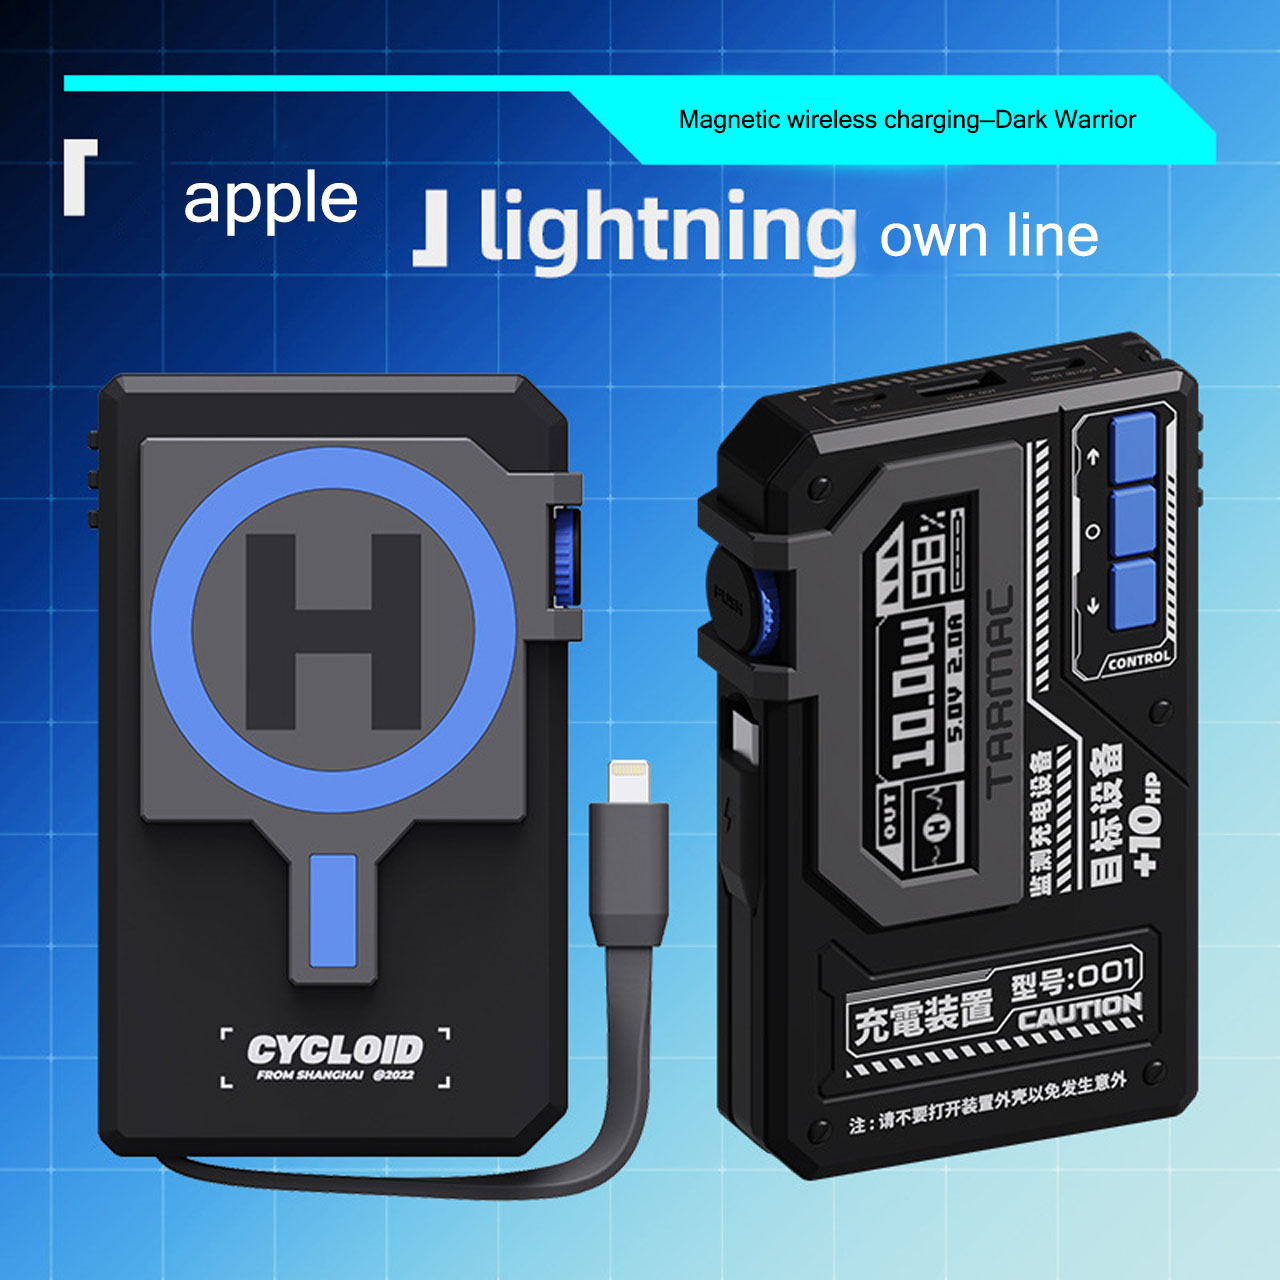 CYCLOID Apron H1 Magnetic Charger is applicable to iPhone14promax Apple MagSafe Wireless Fast Charge Cyberpunk 22.5W self-contained cable super capacity mobile power supply